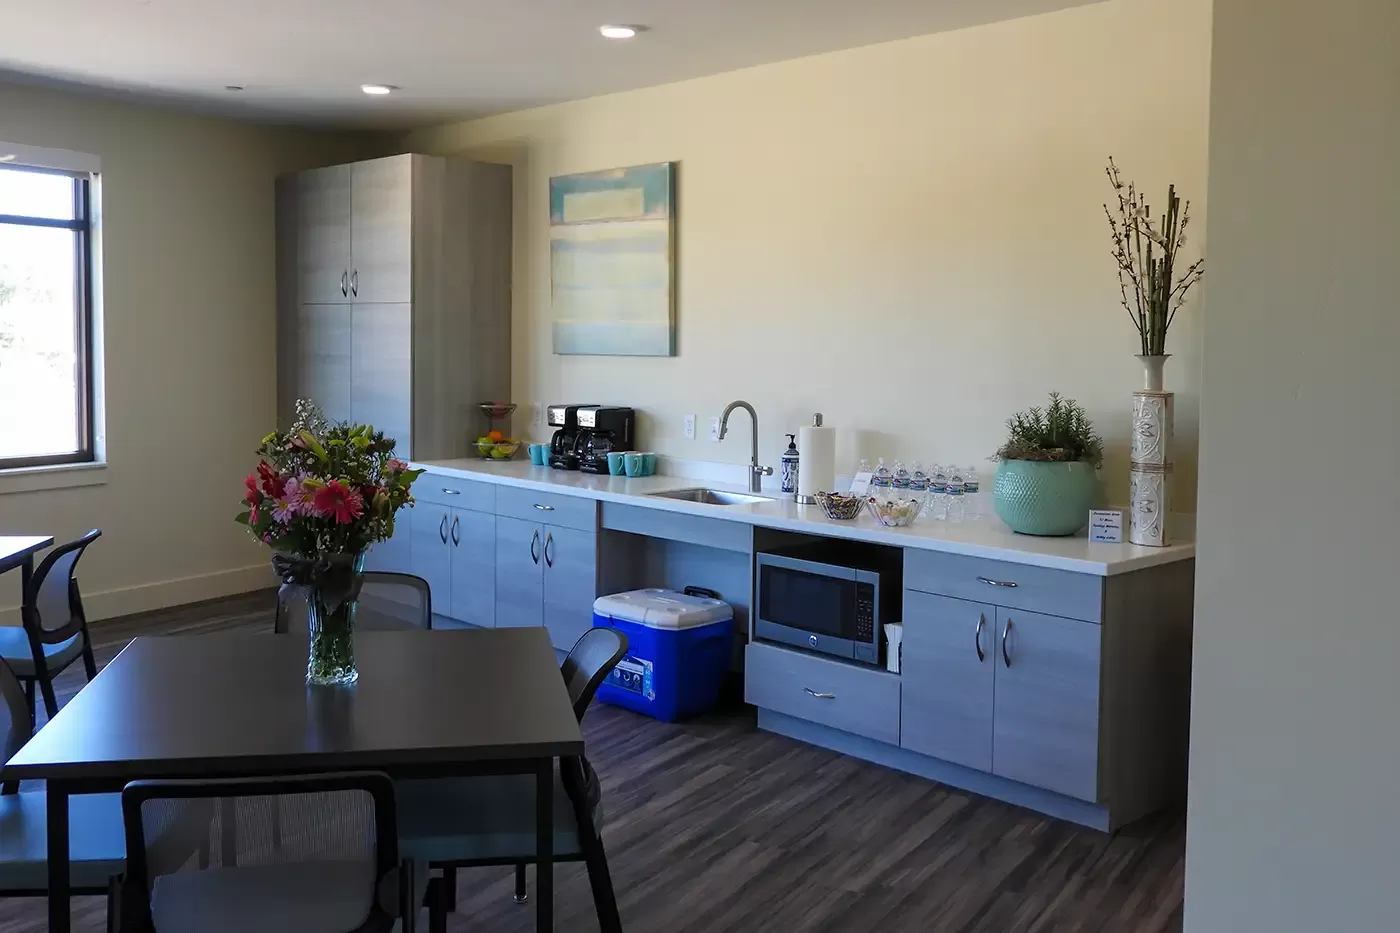 Photo of Amenities and Common Areas at The Highlands appartments in Grand Junction, Colorado